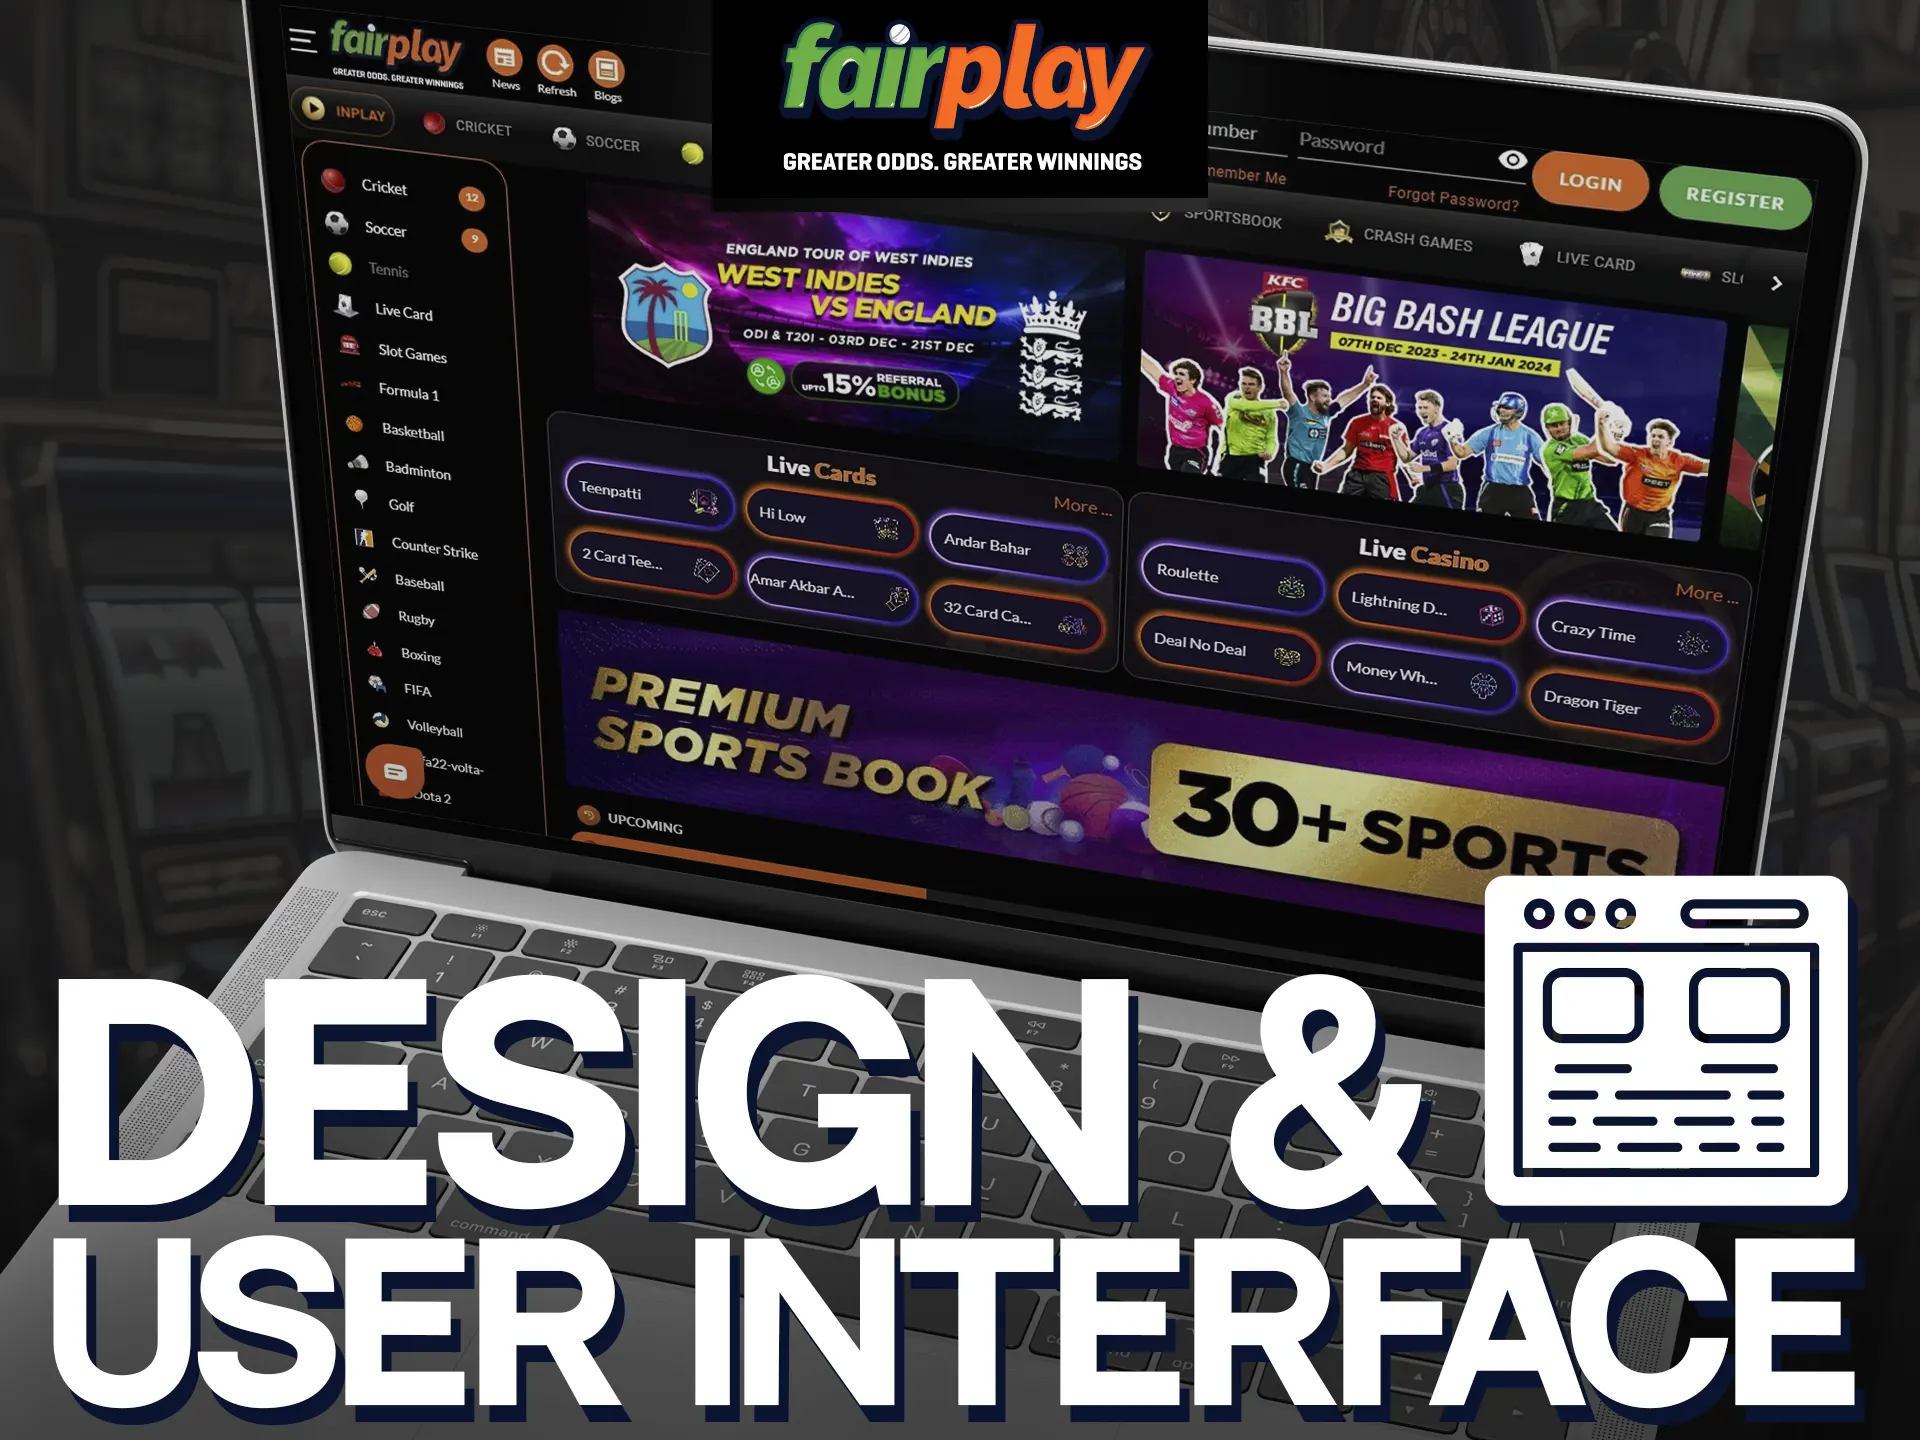 Fairplay Casino Design: Black-themed interface, easy navigation, sections for sports, slots, live games, news.